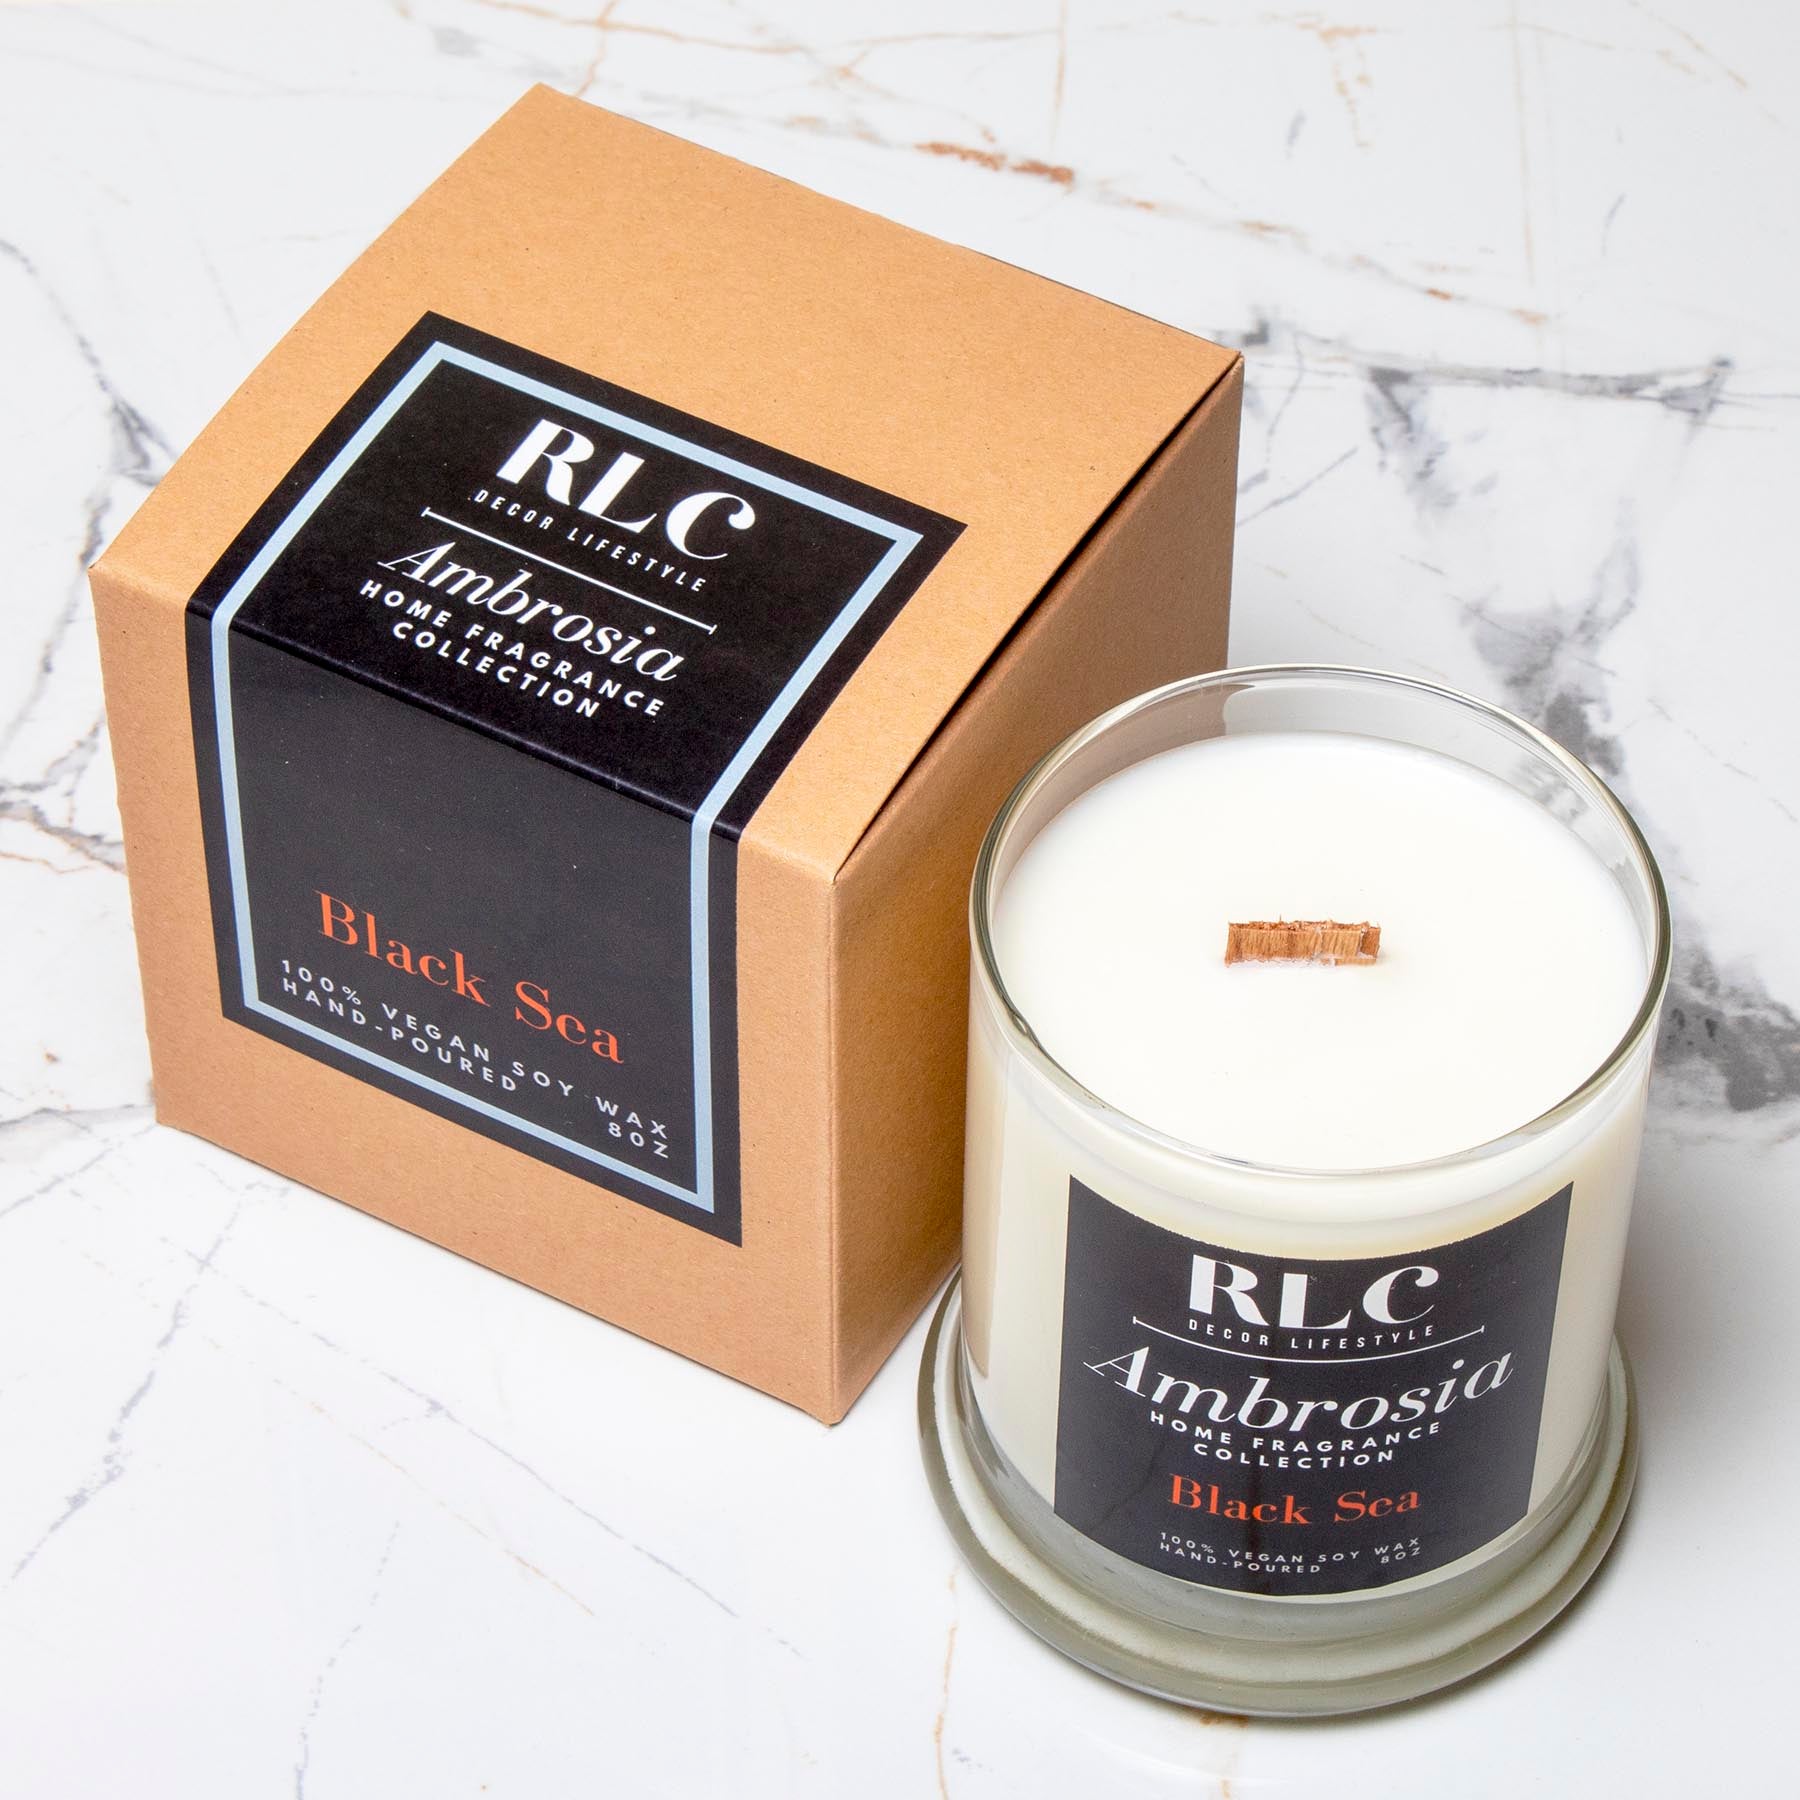 RLC Decor Lifestyle - Ambrosia Collection - Vegan Soy Black Sea Candle - A Chicago-based lifestyle brand. We provide 100% Handpoured Vegan Soy Candles for home & small office, travel candles, home decor, and jewelry. 